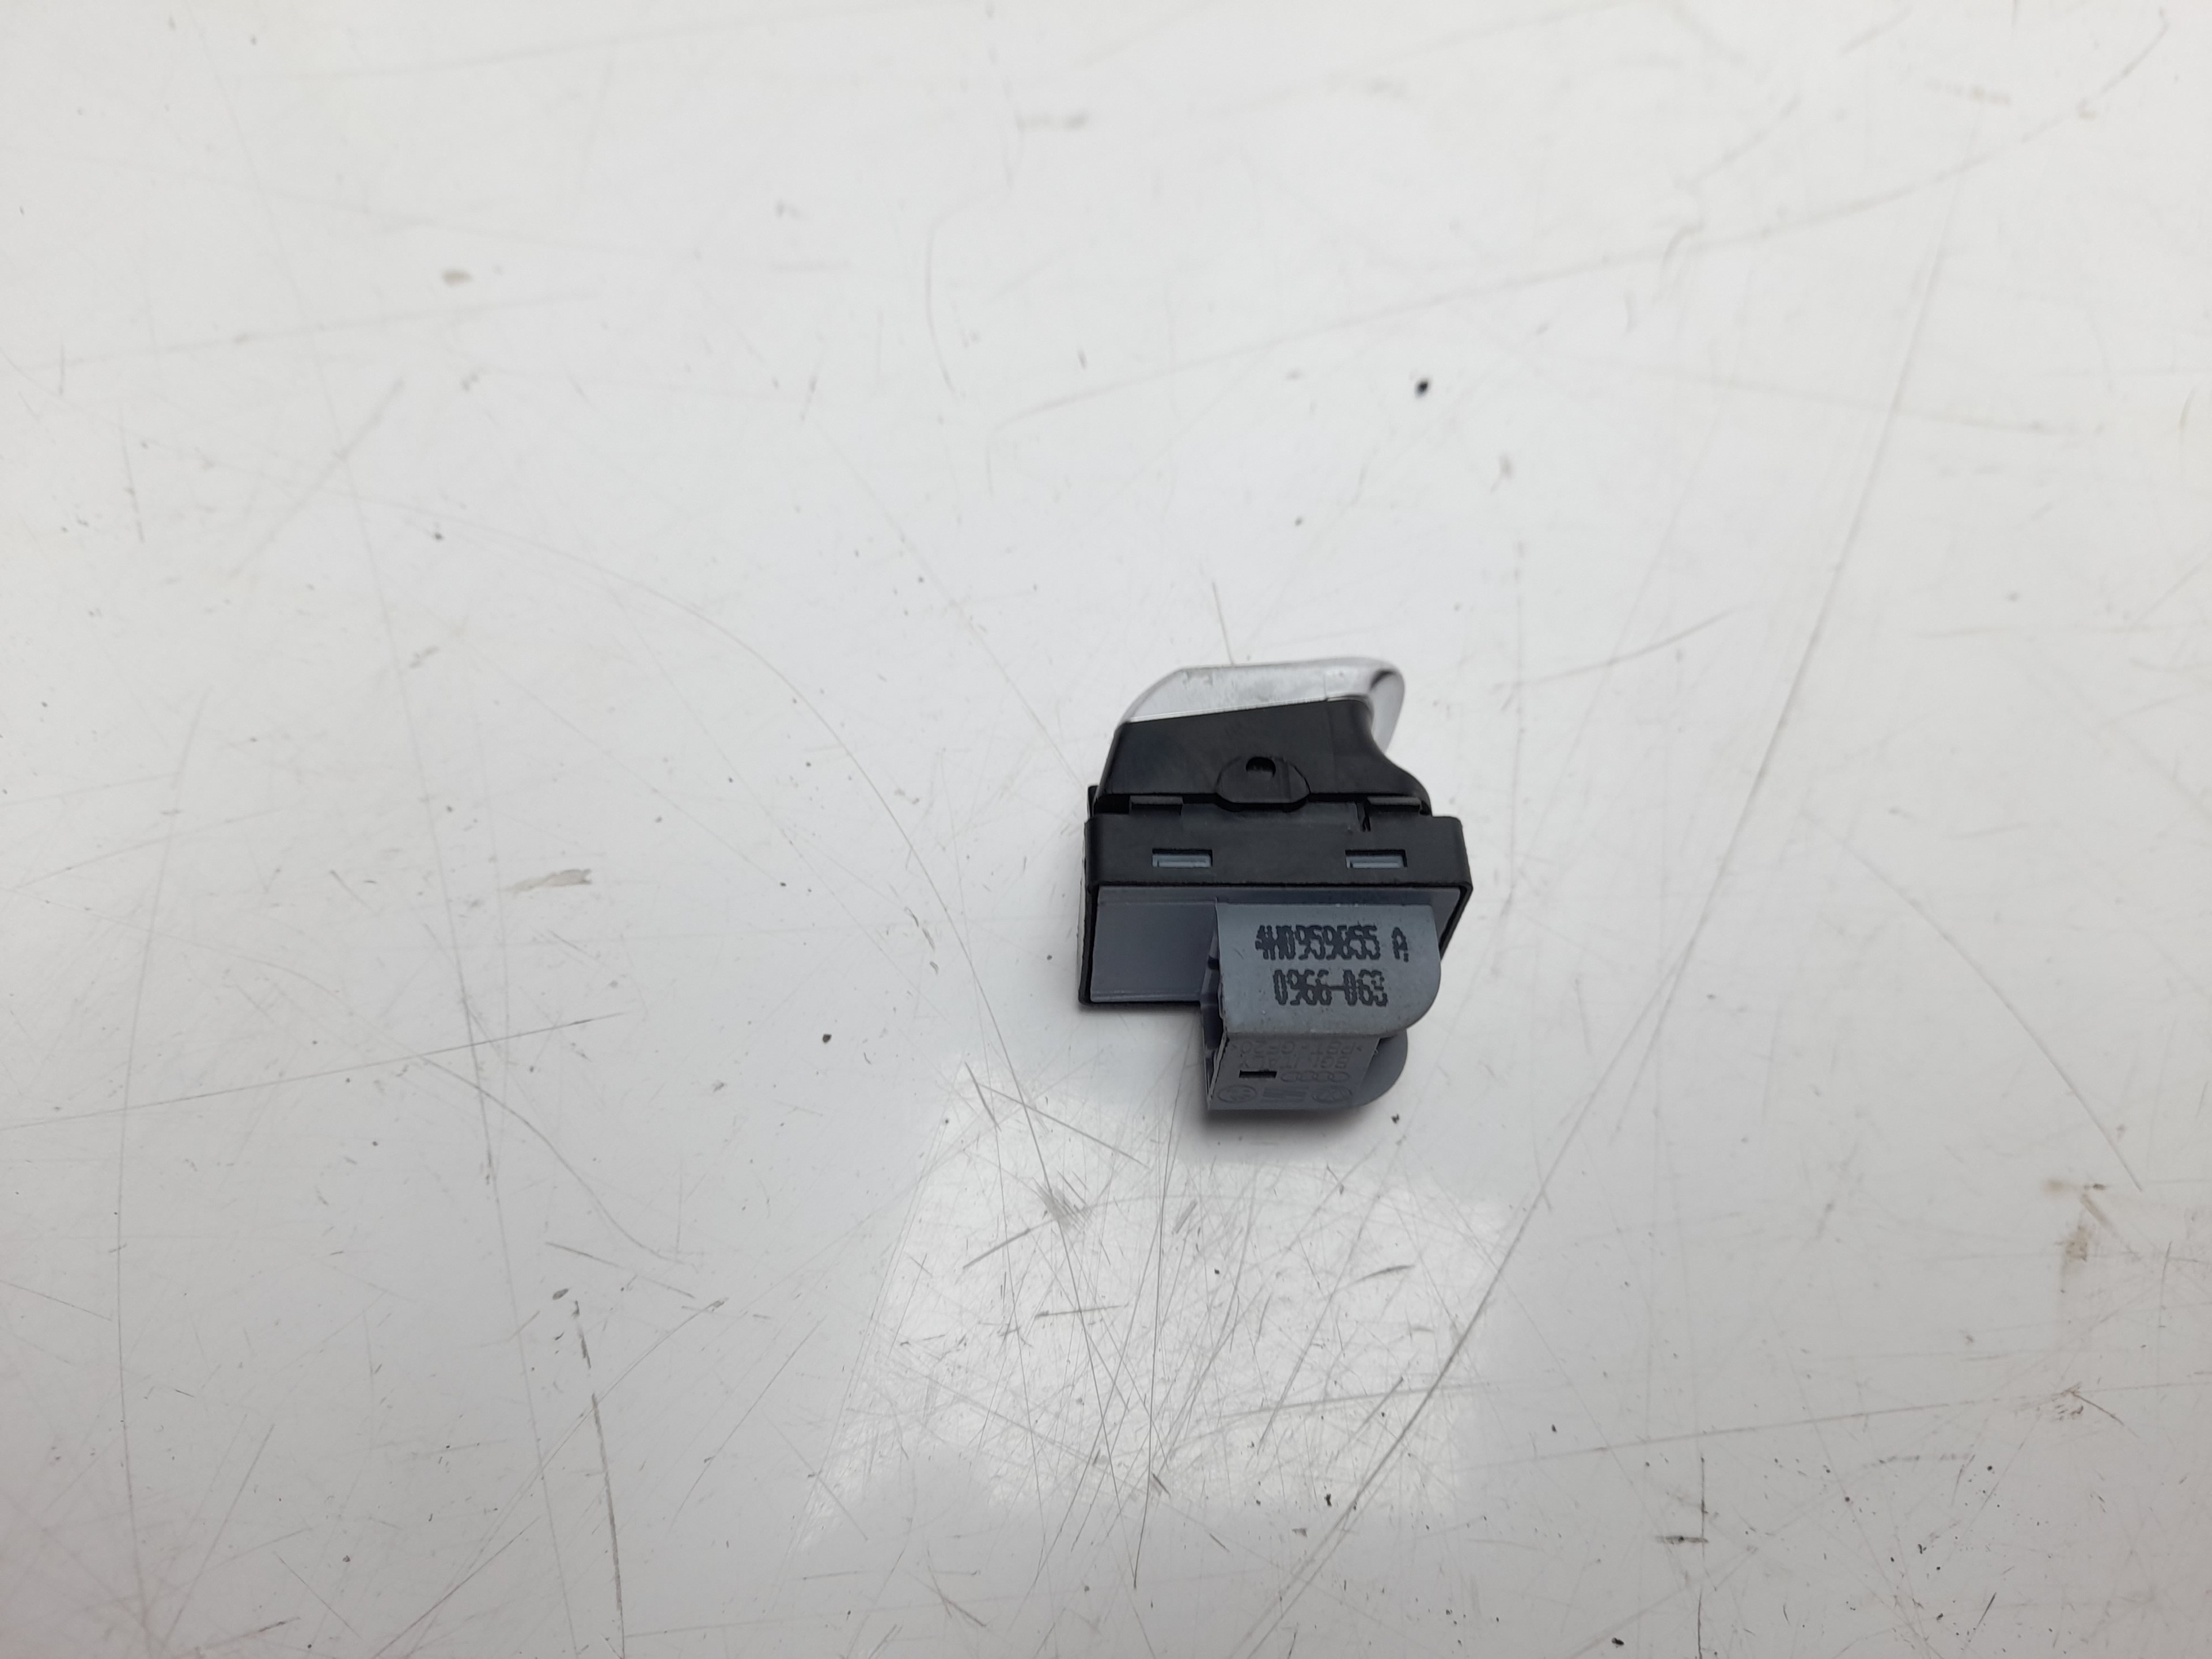 AUDI A7 C7/4G (2010-2020) Rear Right Door Window Control Switch 4H0959855A 18699415